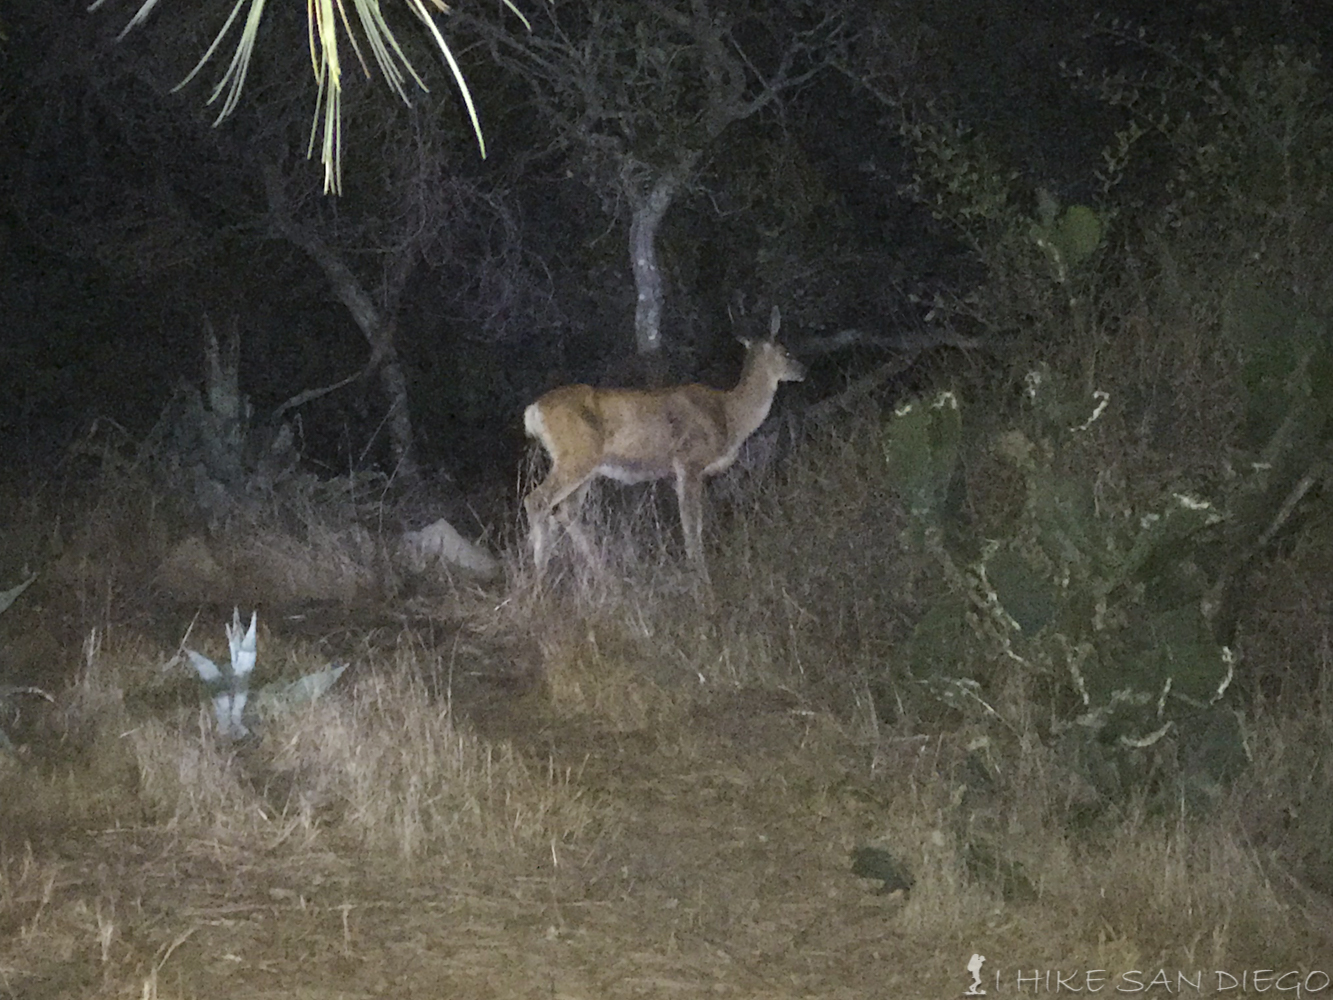 My crappy Iphone picture of a deer eating cactus 10 feet from my tent at 2am in Hermit Gulch Campgrounds